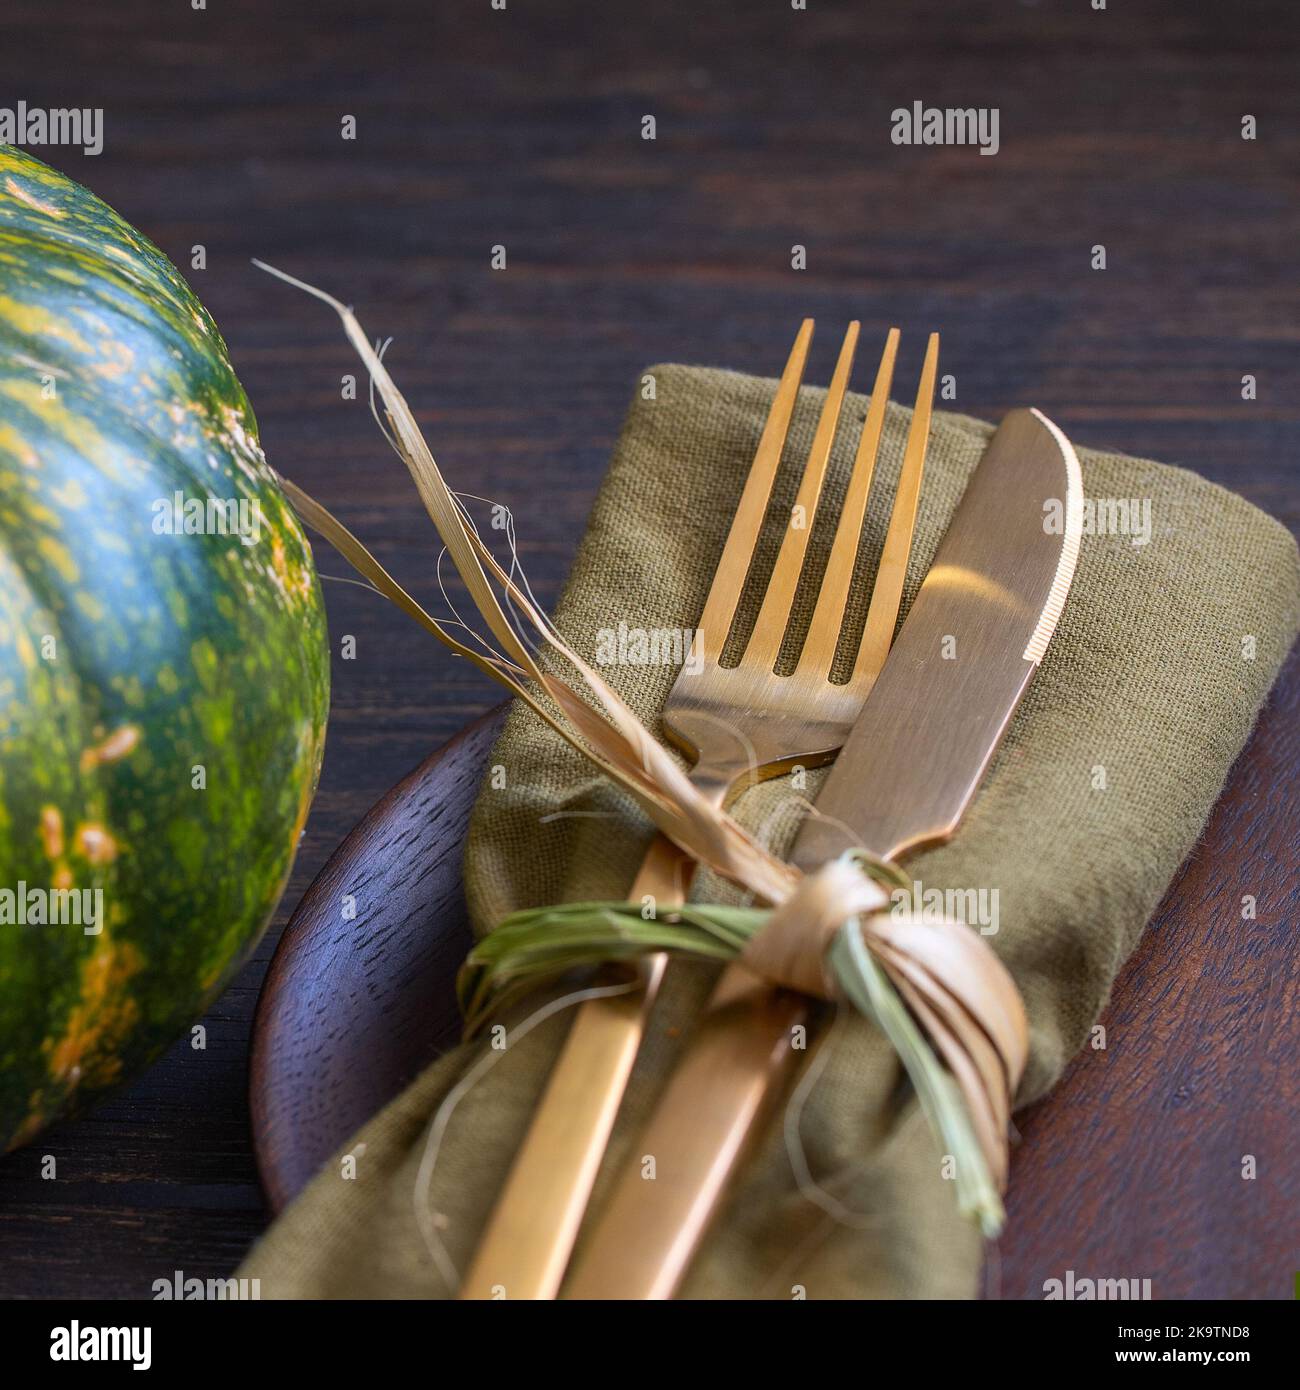 Gold cutlery with napkin and pumpkin on wooden table for Thanksgiving dinner concept. Festive autumn table settings background. Stock Photo